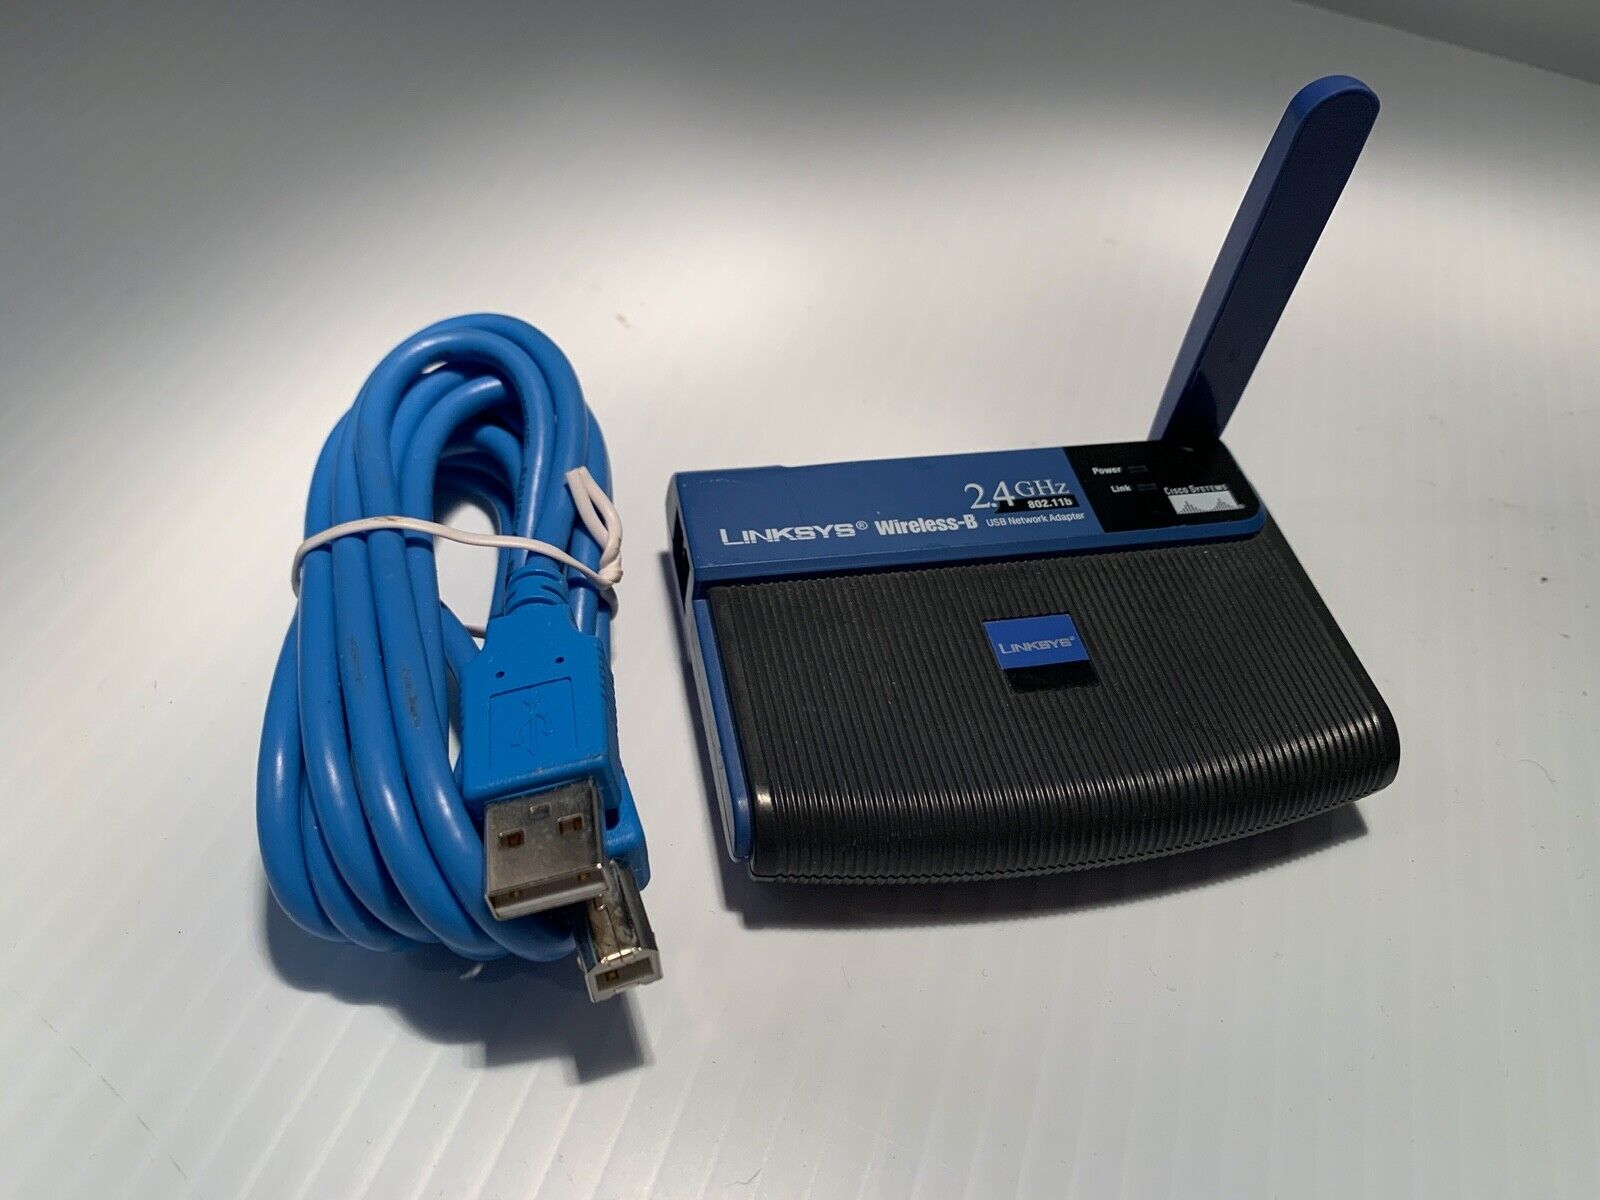 Linksys WUSB11v4 ver. 2.4 Ghz Wireless B USB Network Adapter w/ Cable 802.11b